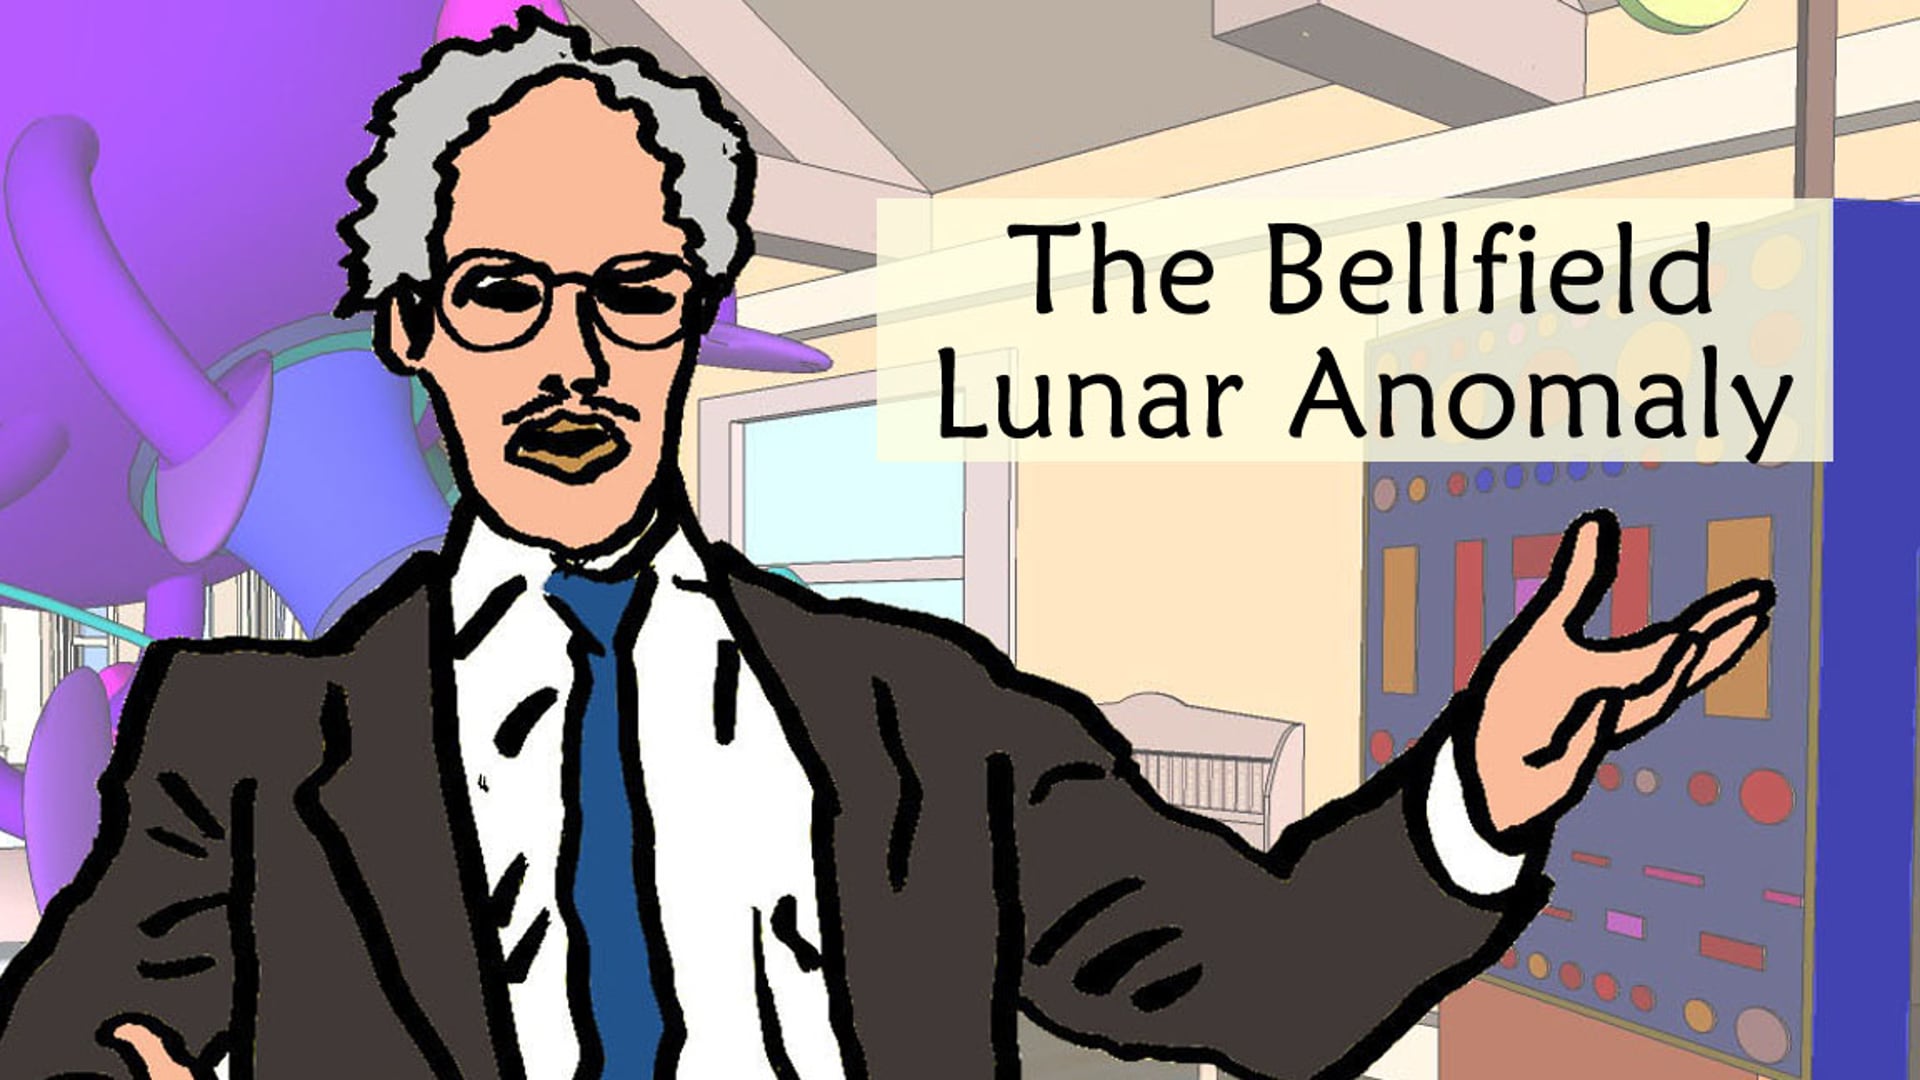 The Bellfield Lunar Anomaly